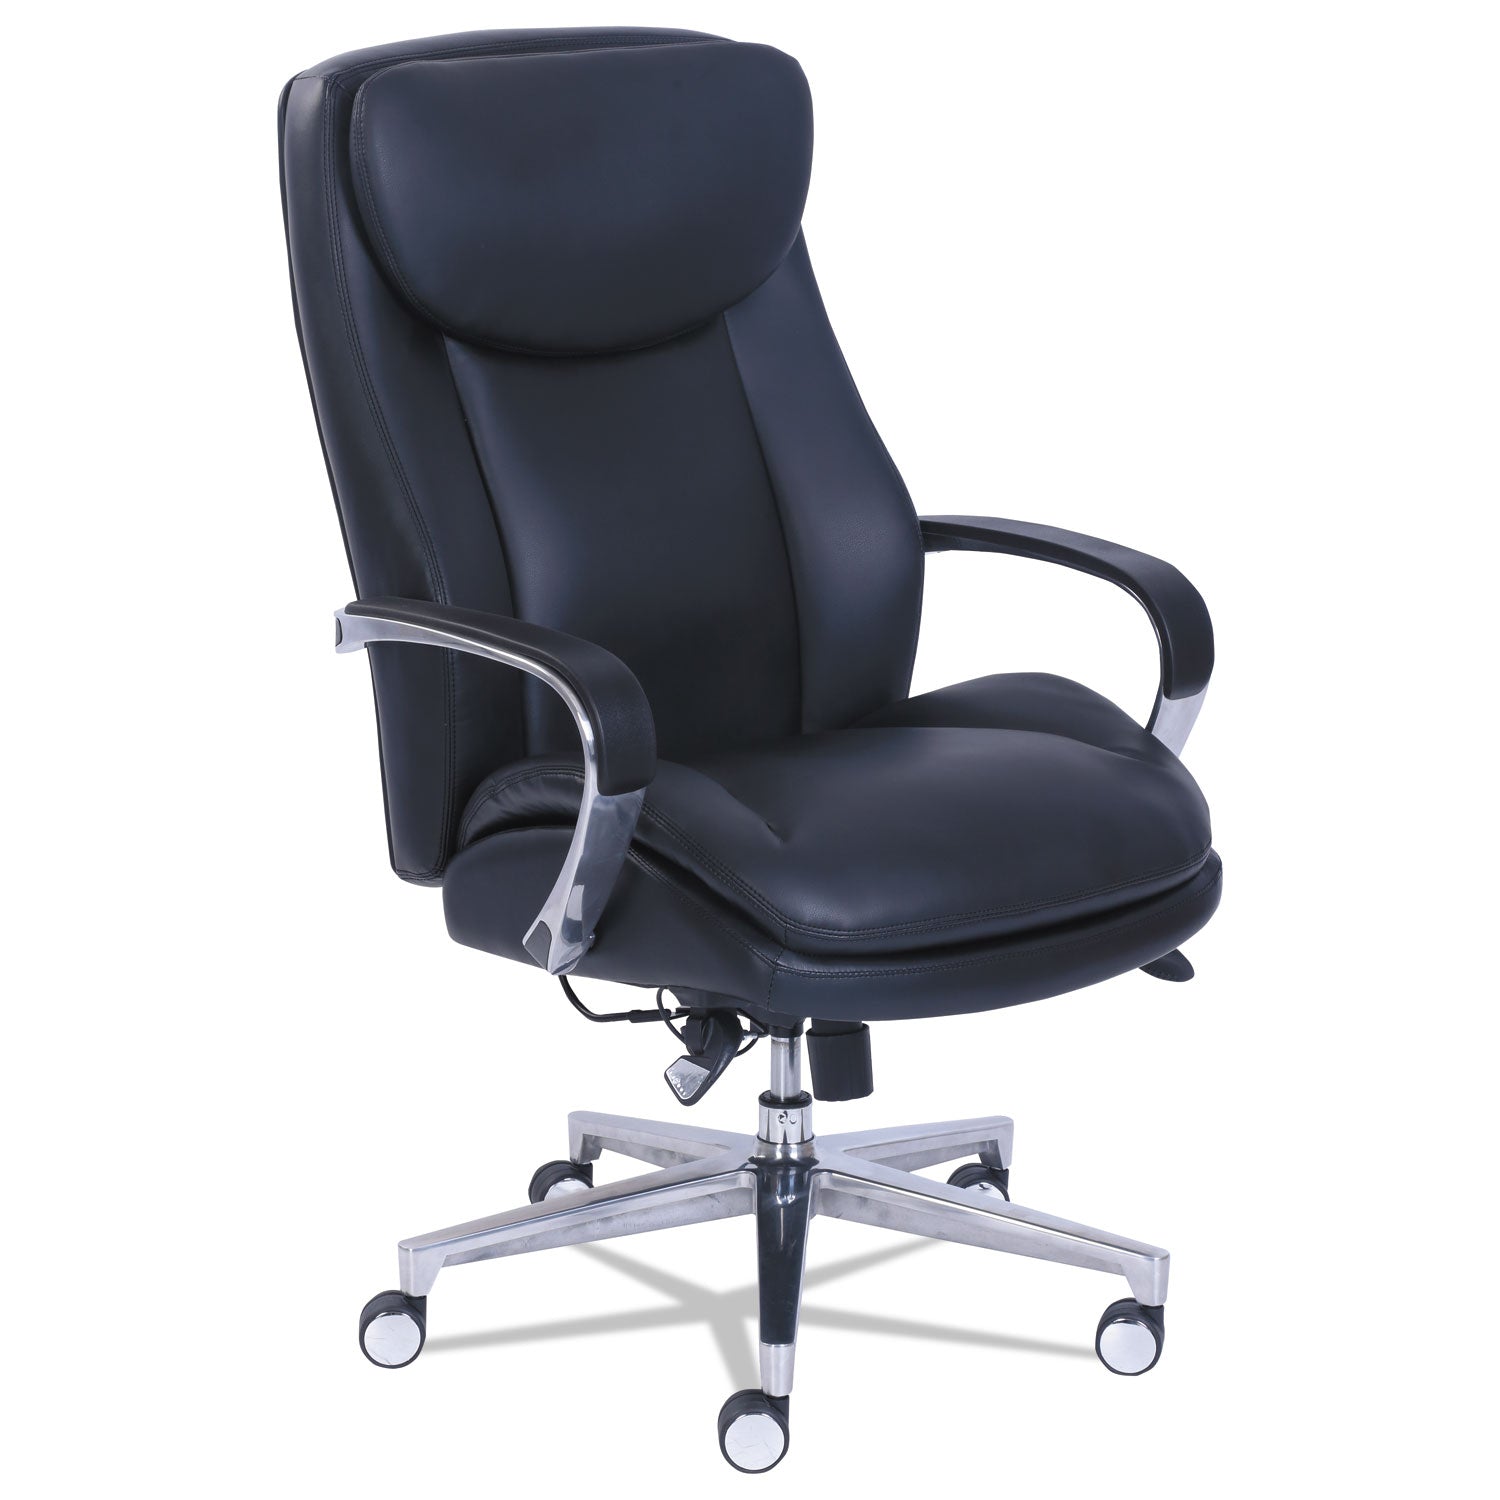 commercial-2000-high-back-executive-chair-dynamic-lumbar-support-supports-300lb-20-to-23-seat-height-black-silver-base_lzb48957 - 1